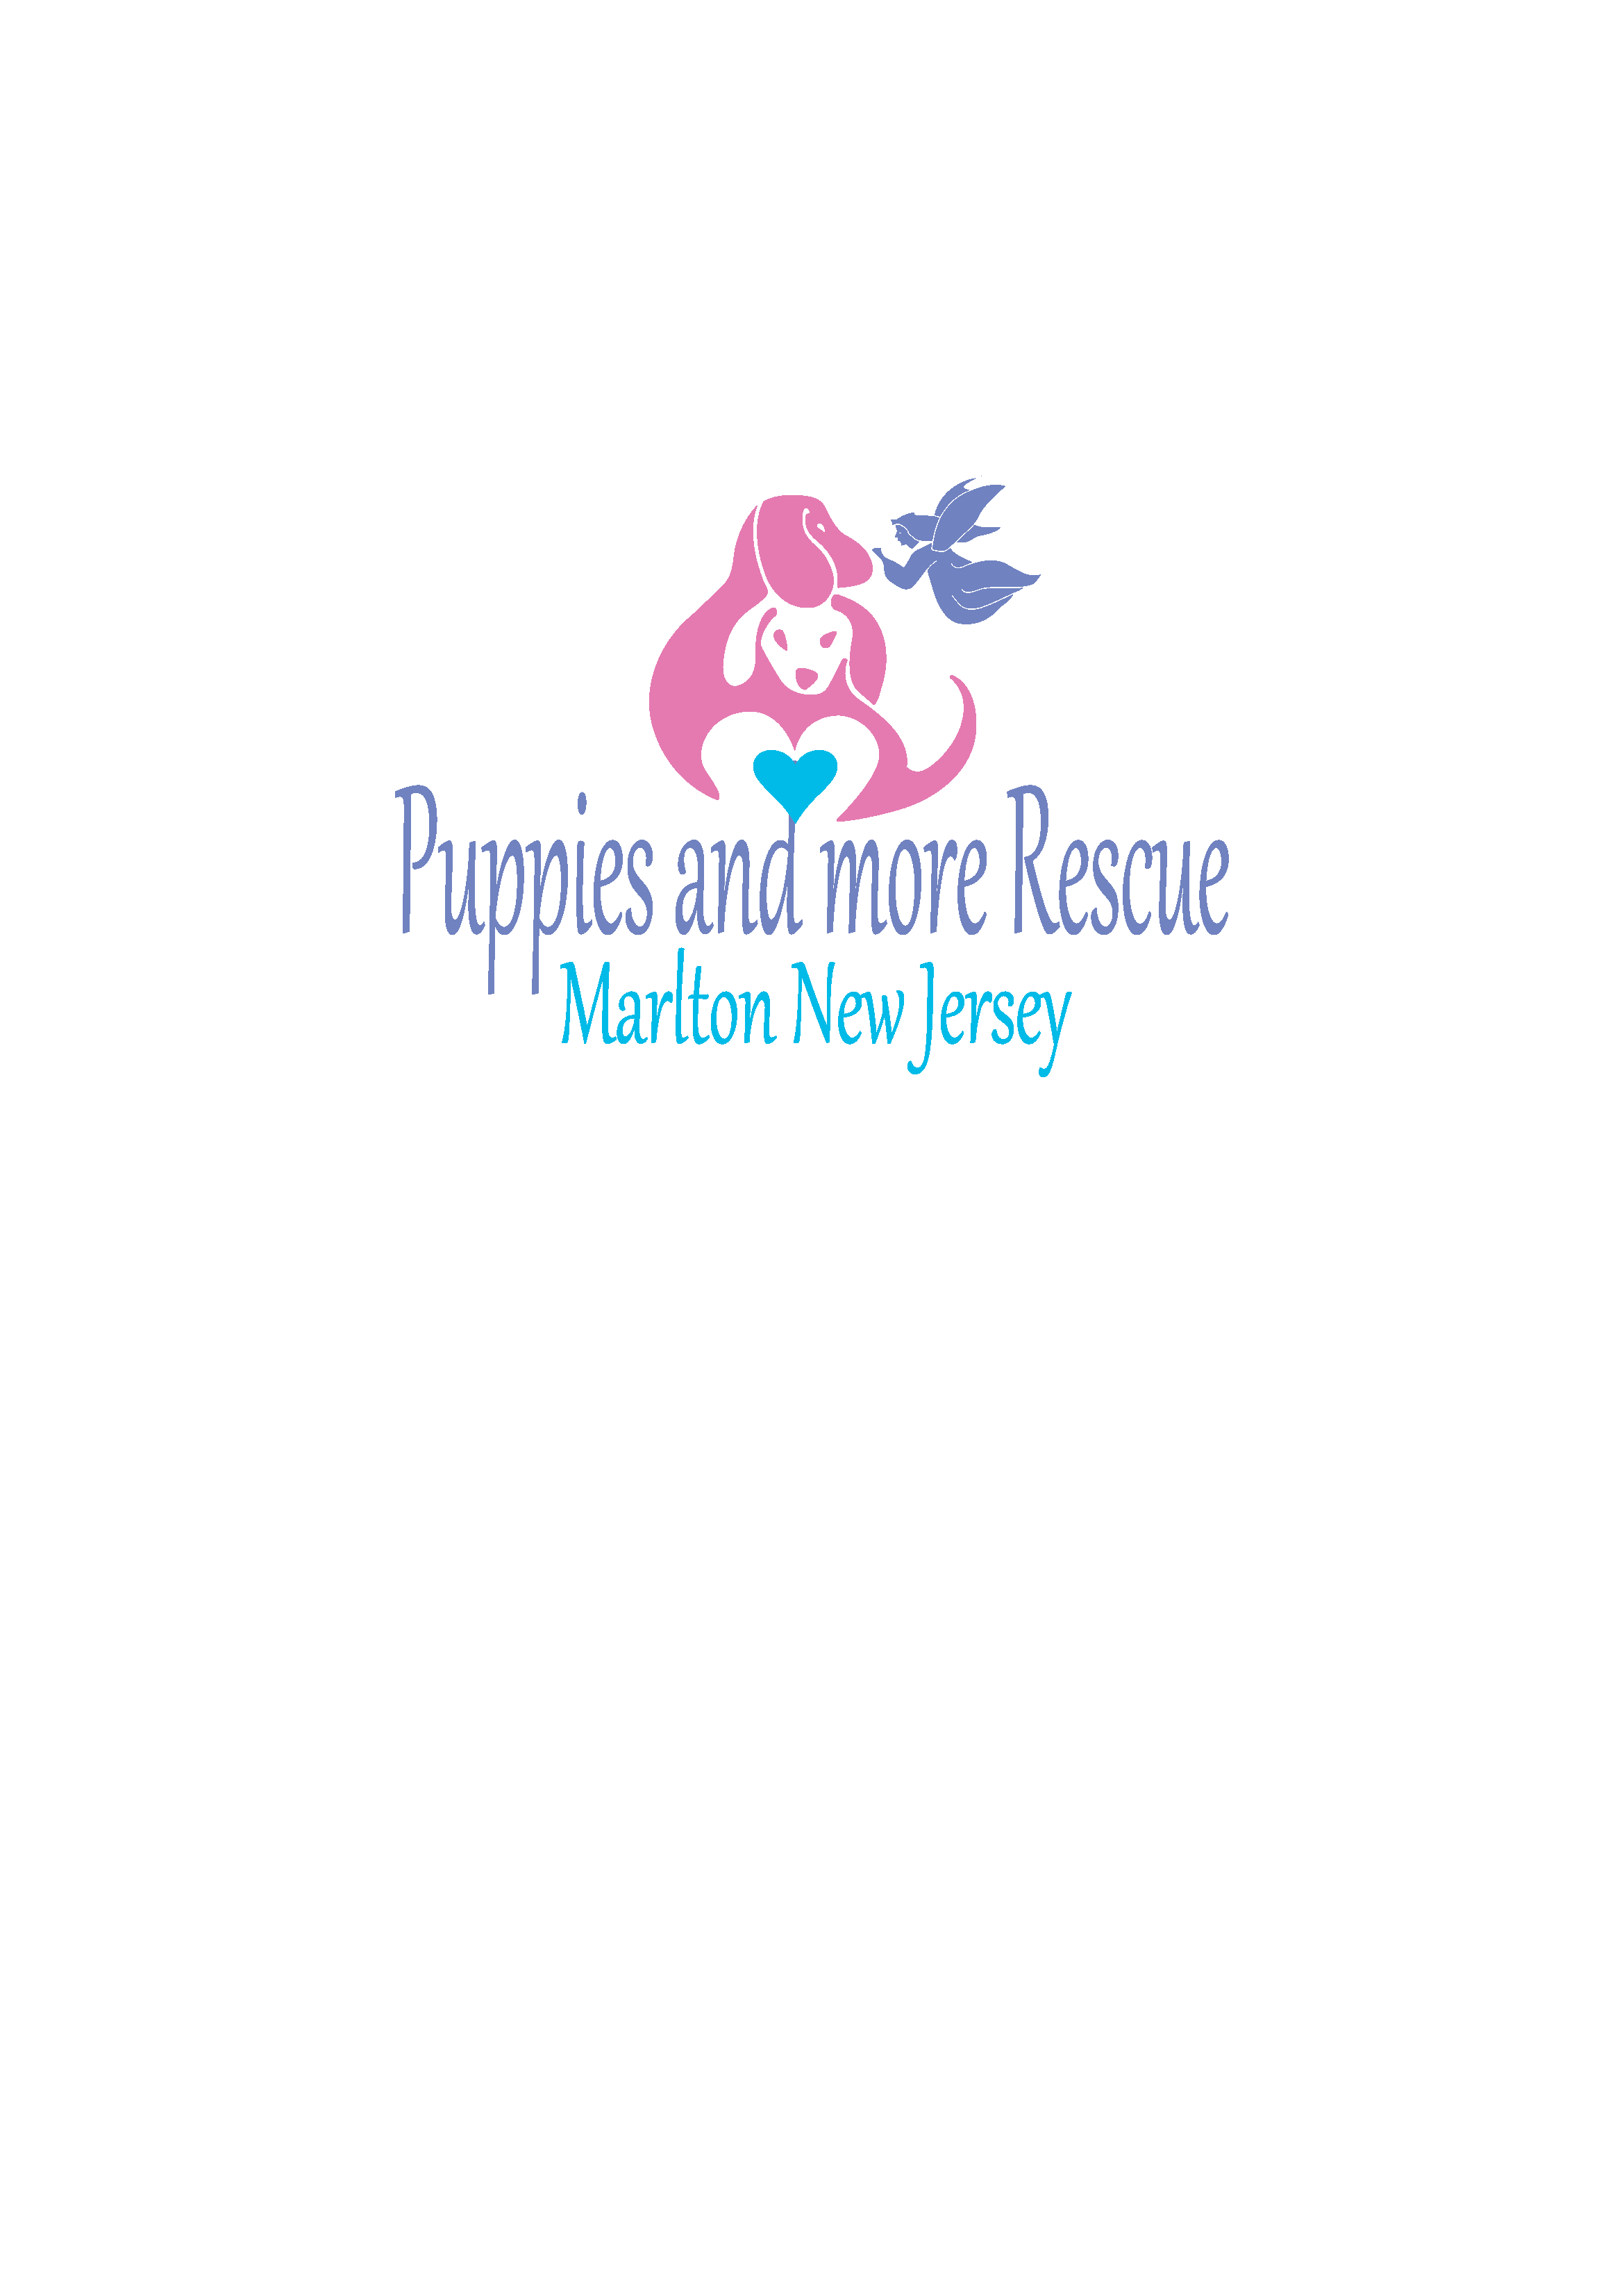 Puppies and More Rescue